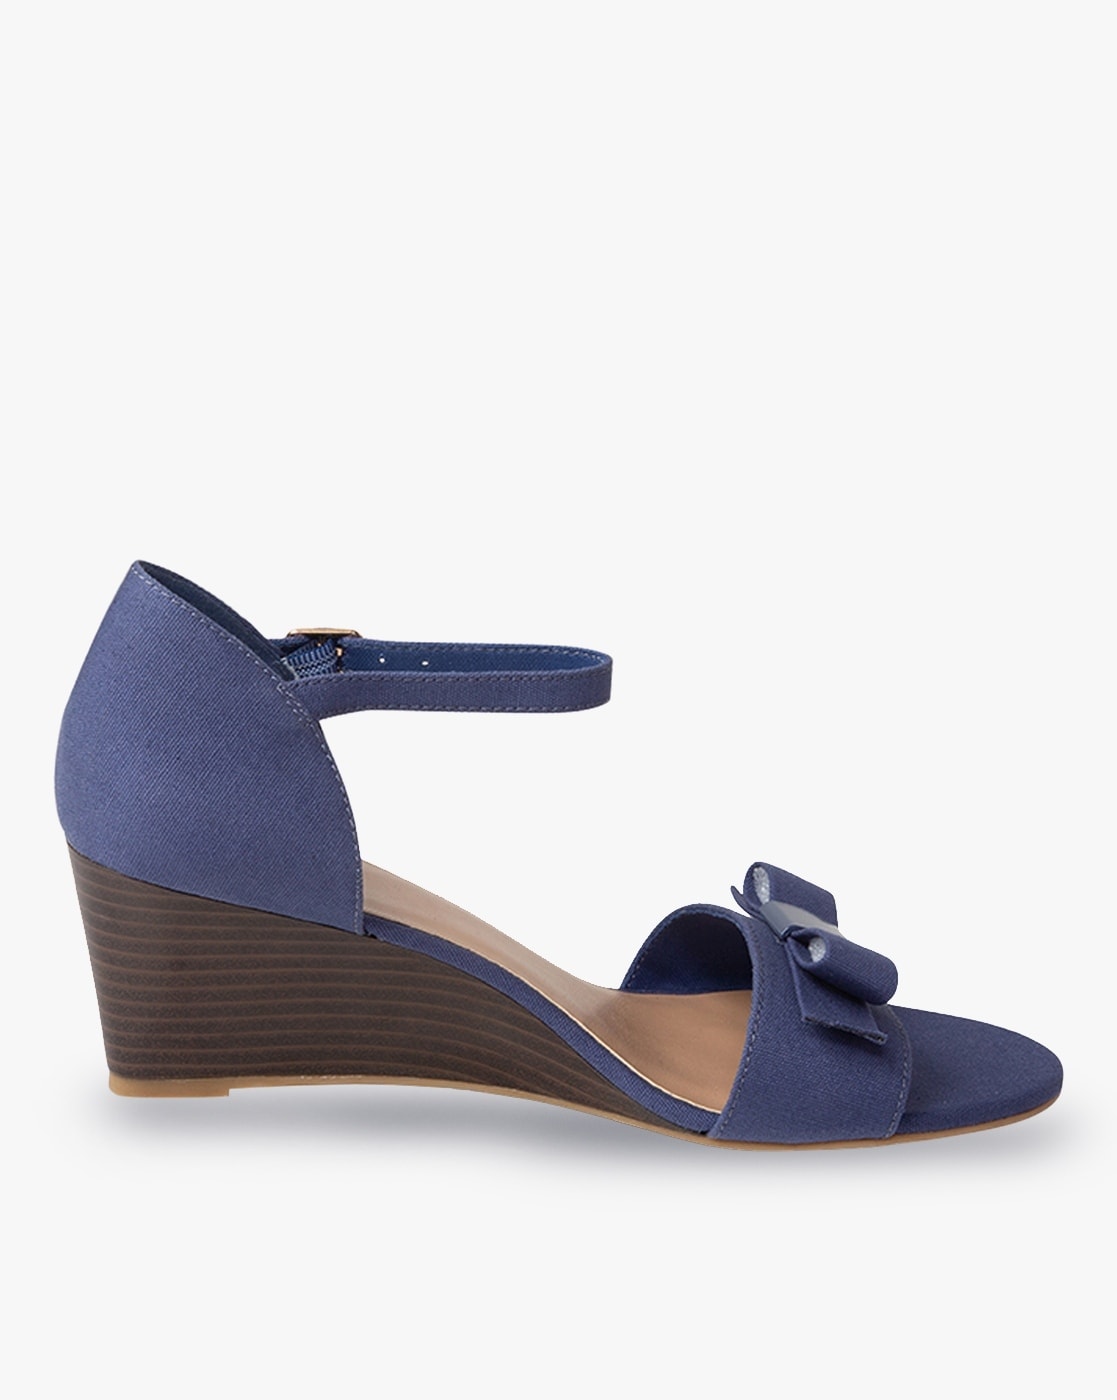 Buy Blue Heeled Sandals for Women by FIONI by Payless Online  Ajiocom